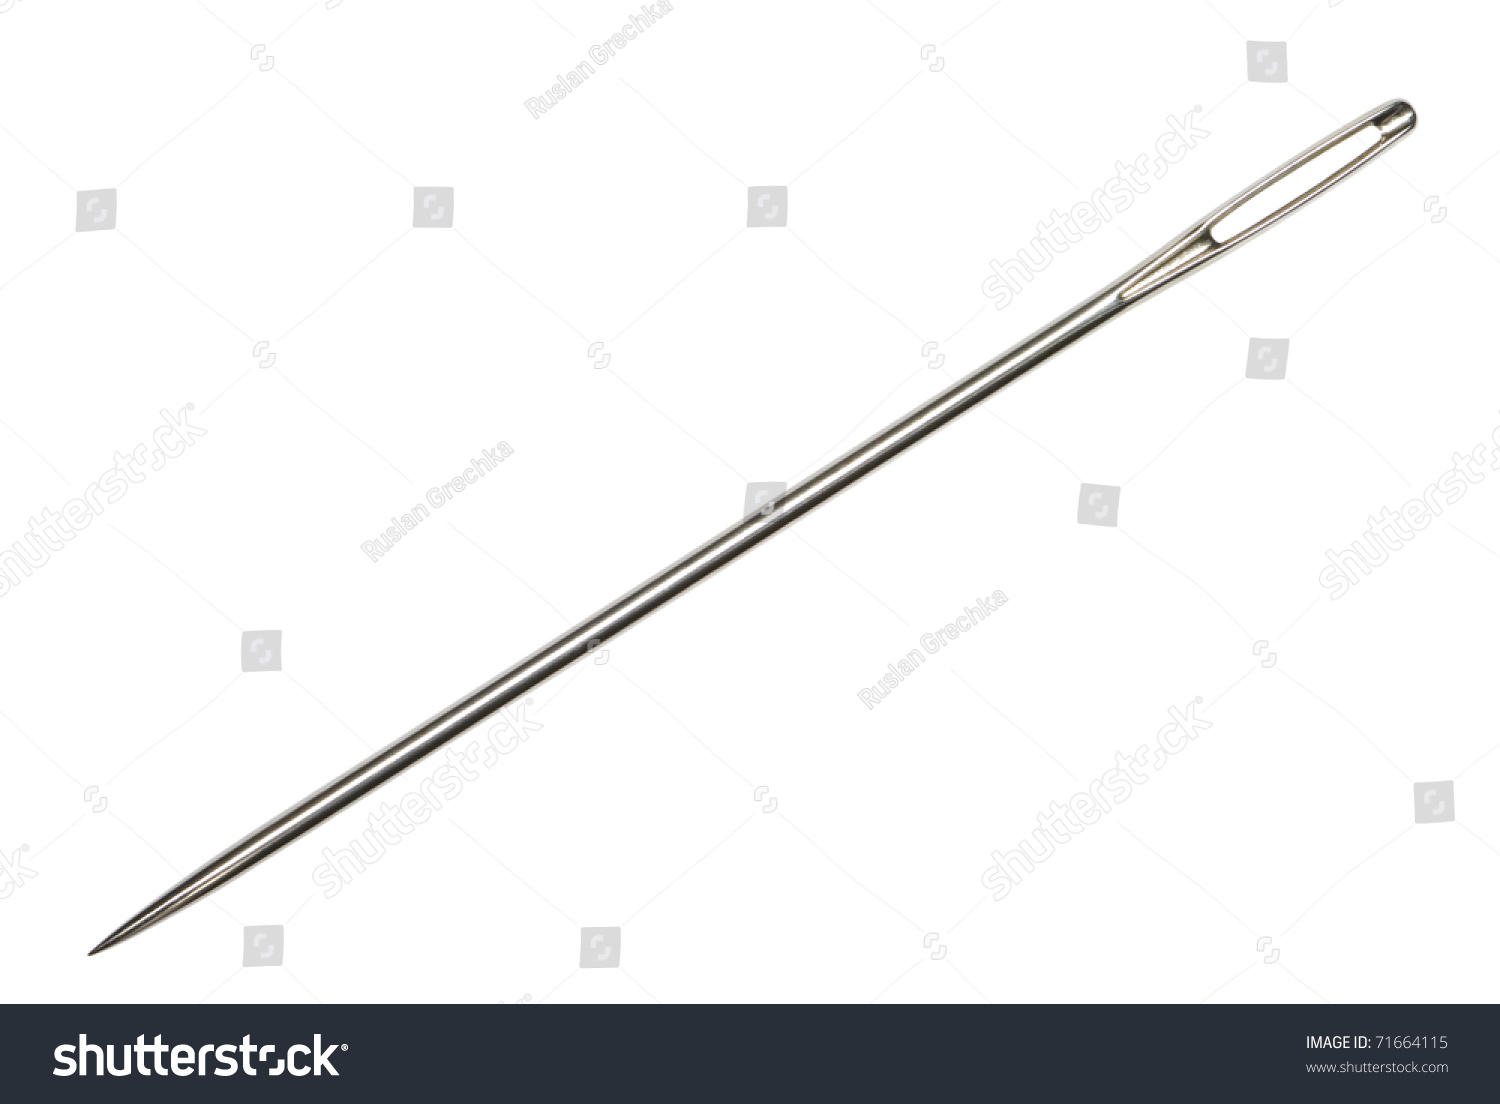 Needle (the tool for sewing) on an isolated white background. #71664115